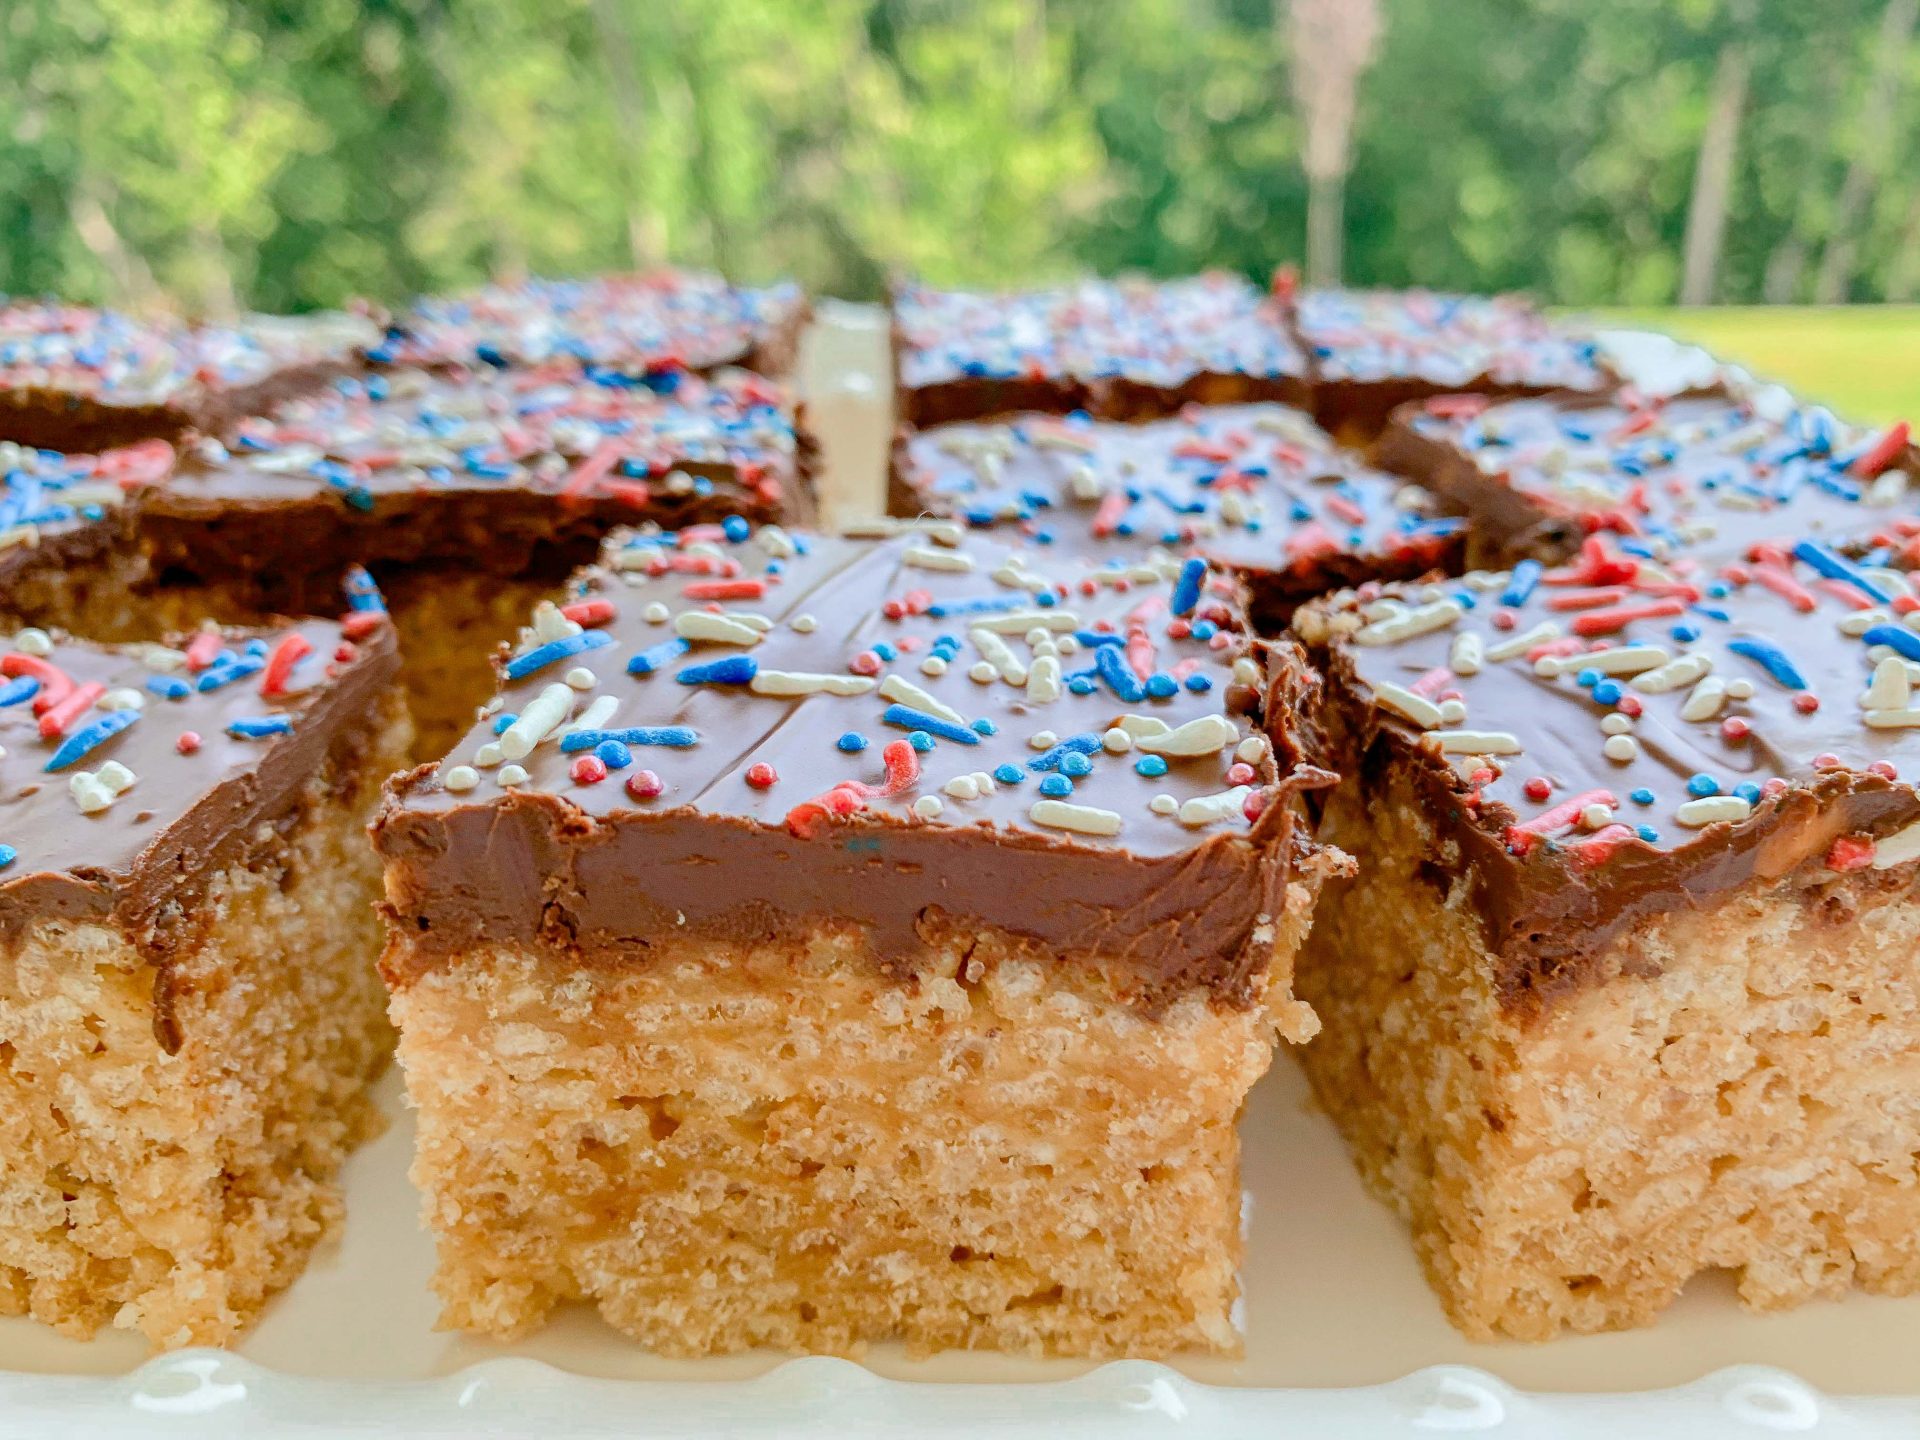 Scotcharoos, 4th of July, Rice Krispies, Red White and Blue Dessert, Scotcharoo recipe, holiday, July, memorial day, Labor Day, peanut butter Rice Krispies, chocolate peanut butter Rice Krispies, summer treats, no bake 